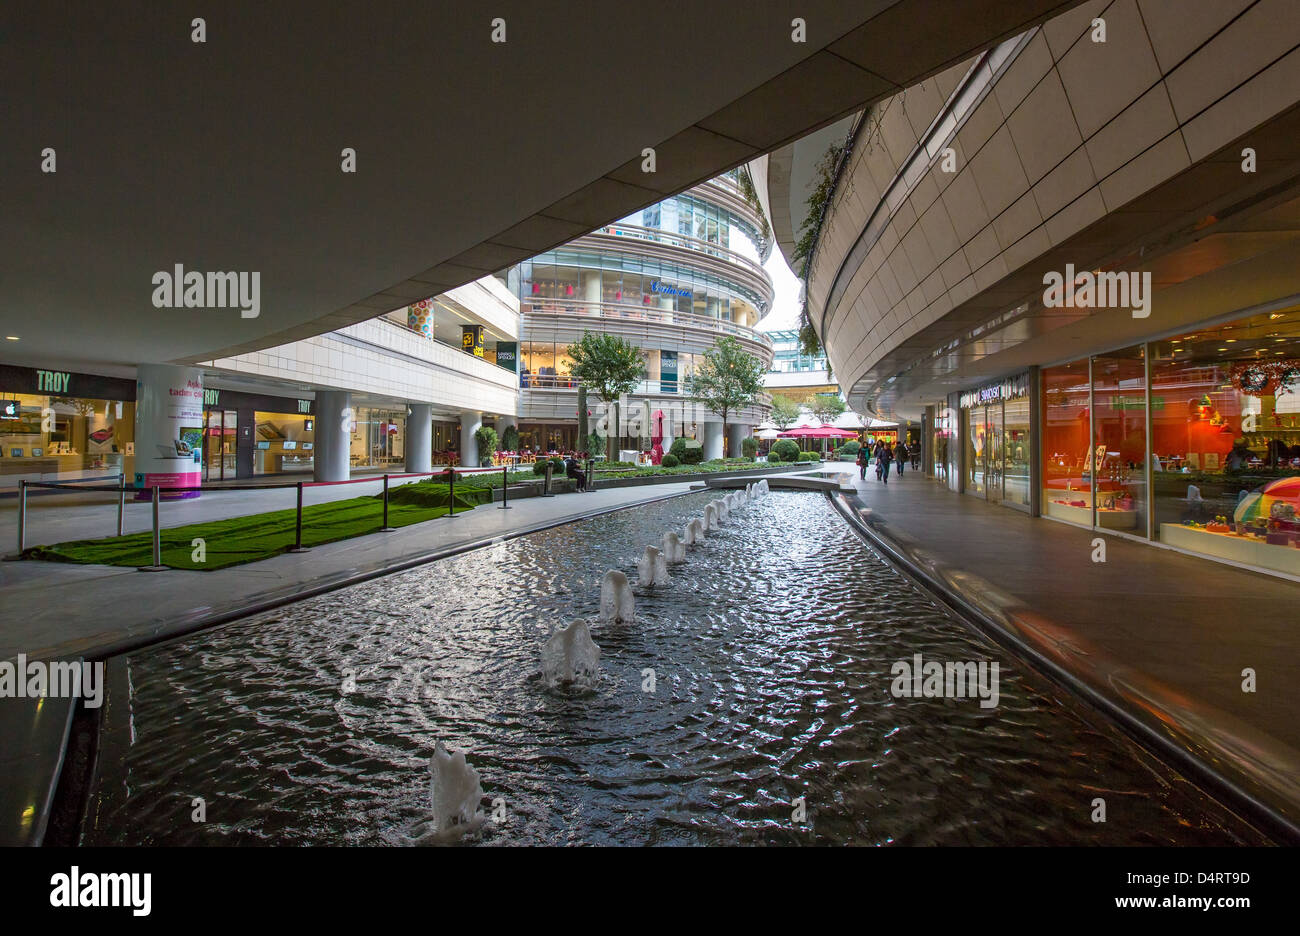 Canyon Mall High Resolution Stock Photography and Images - Alamy